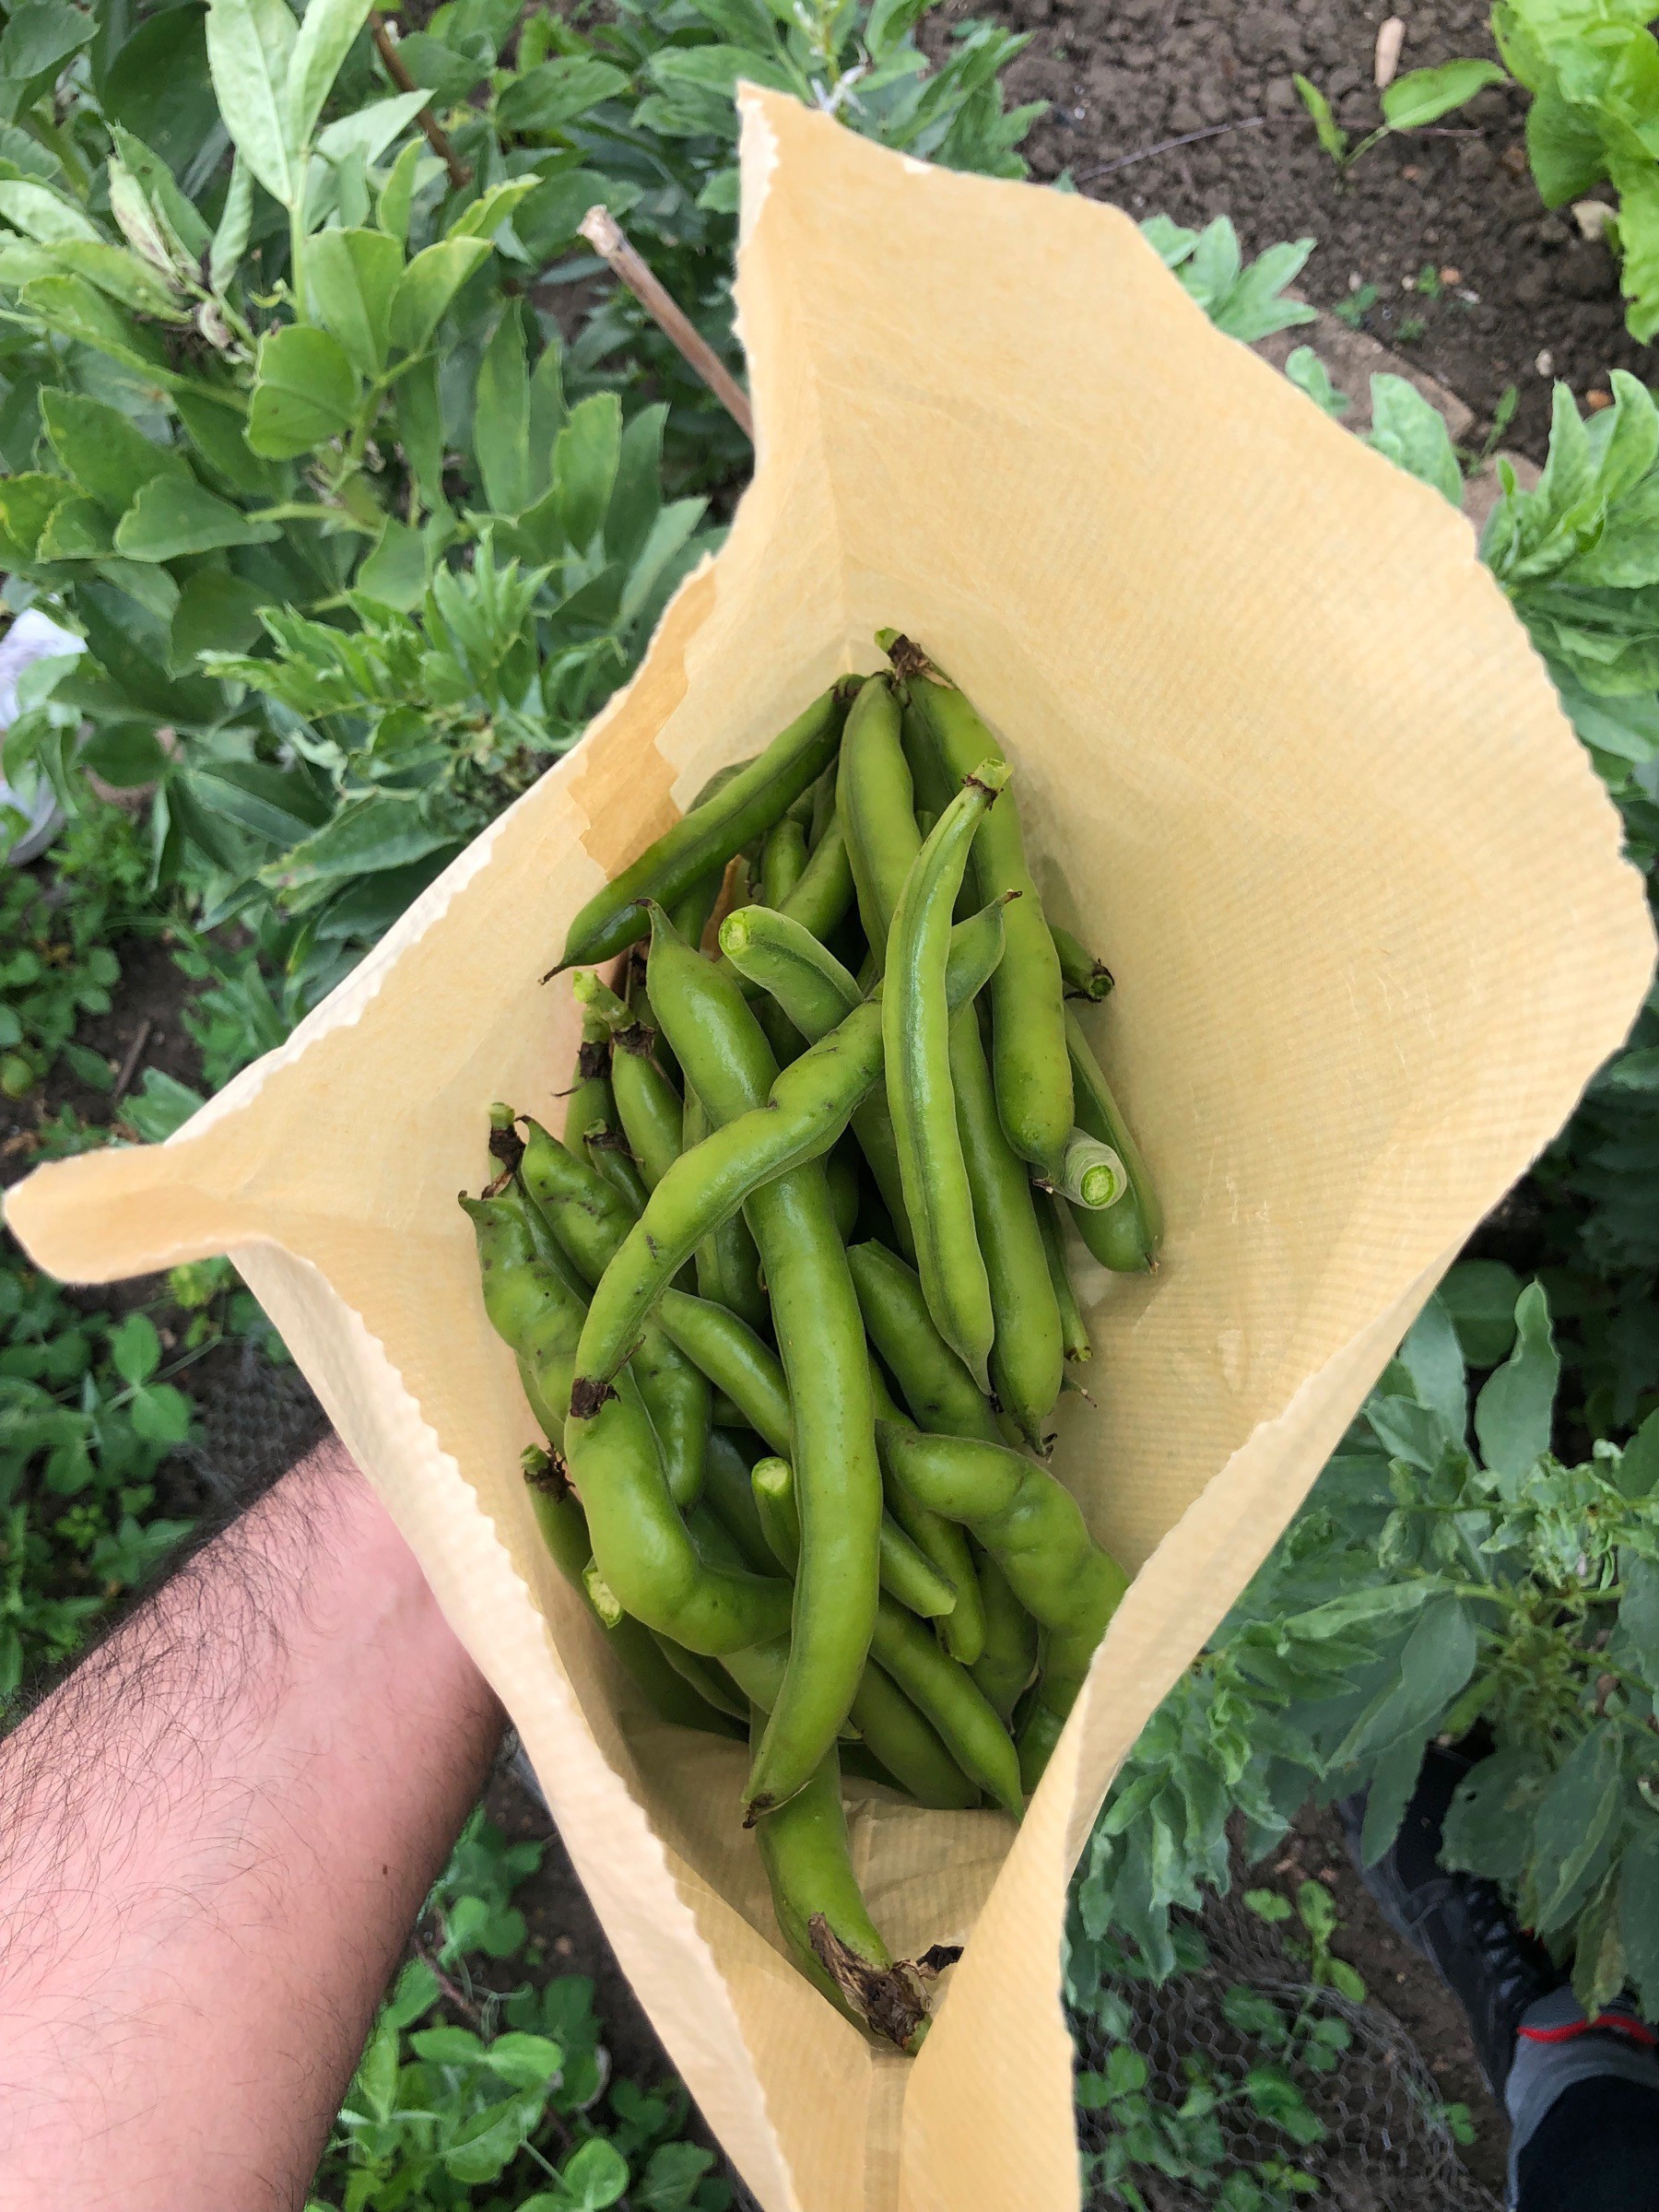 Brown bag with peas and broad beans